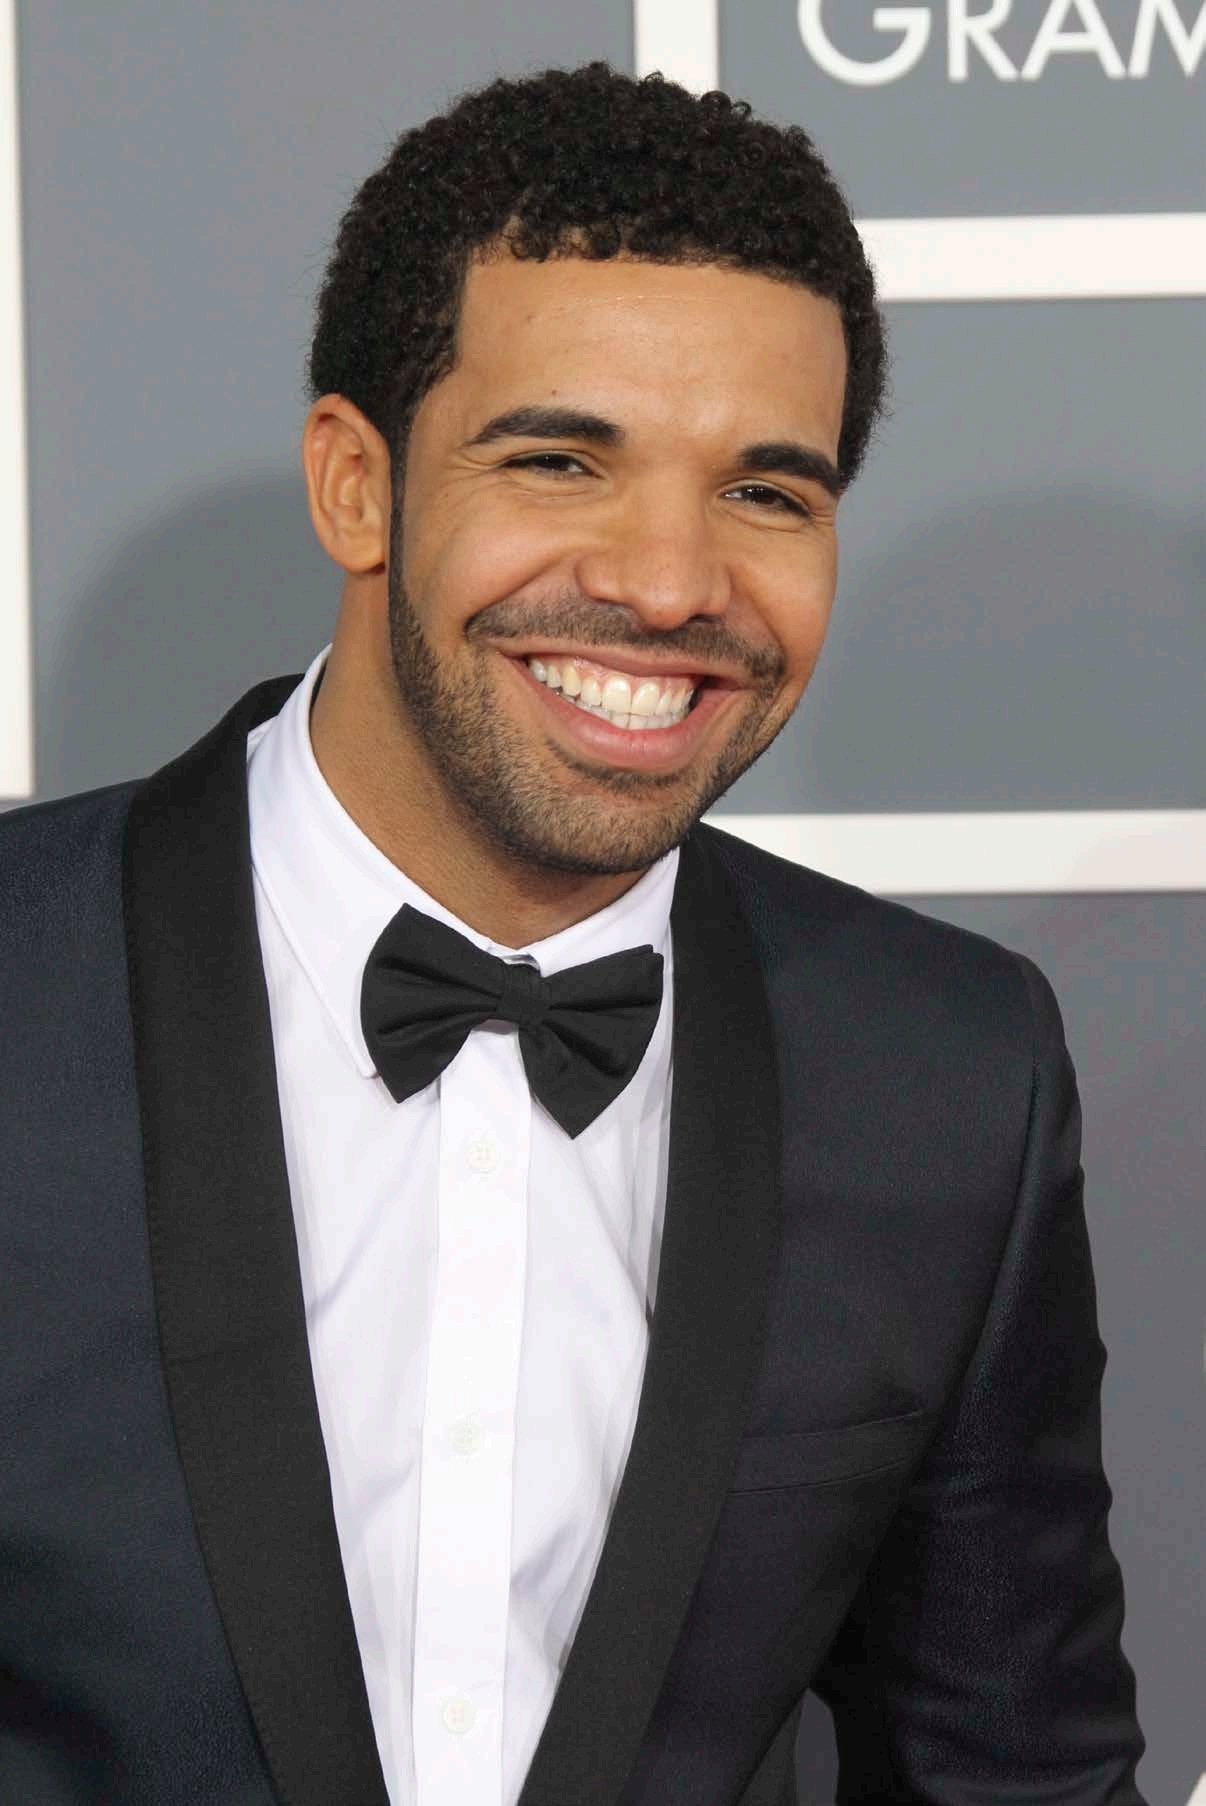 Drake appears at the 55th Annual Grammy Awards in California in 2013 WINNING - photo 6